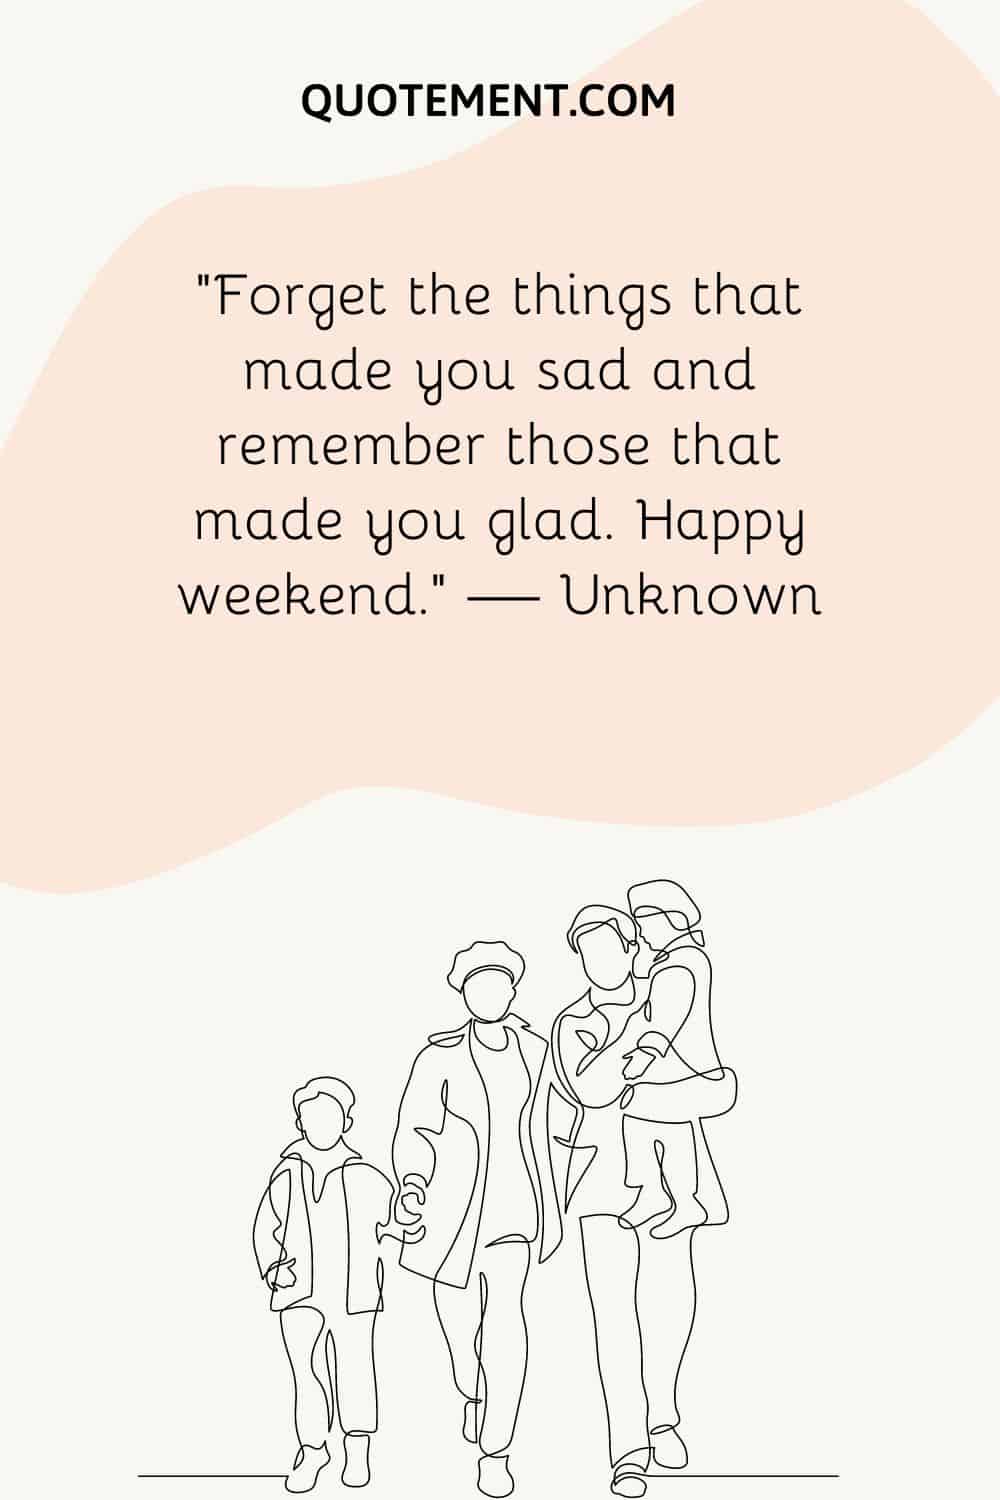 family walking illustration representing positive weekend quote